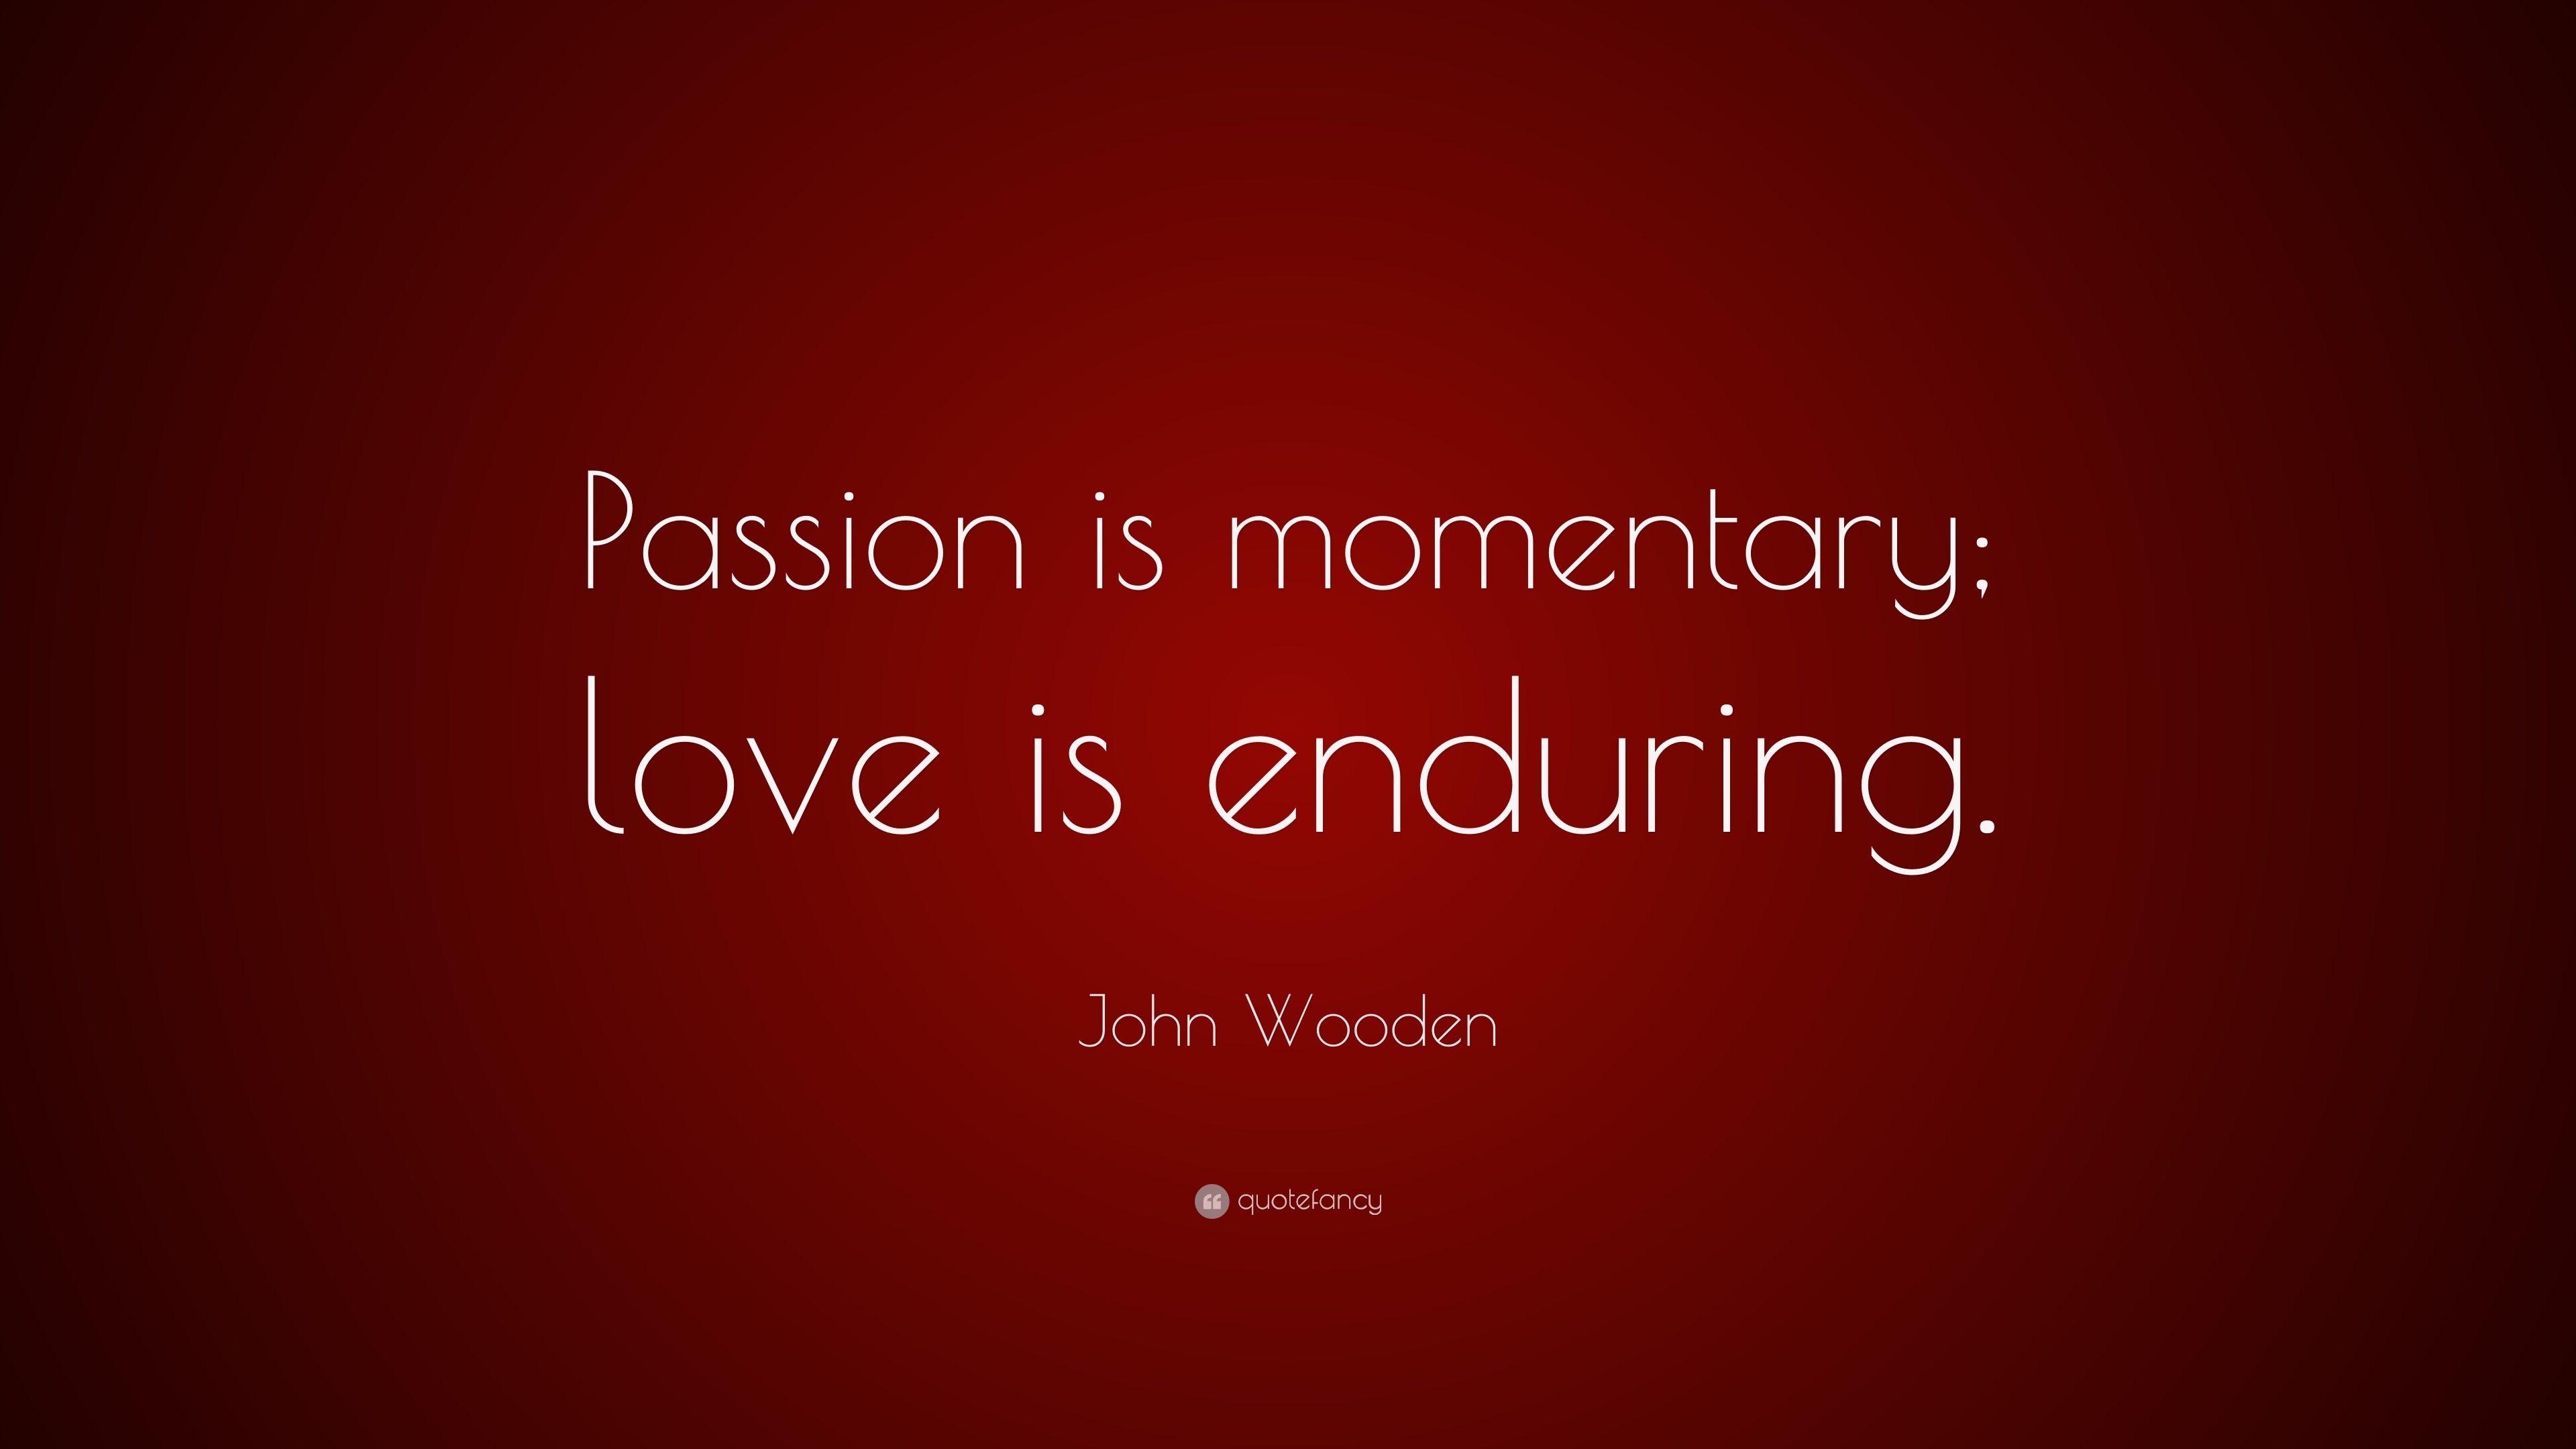 John Wooden Quote “Passion is momentary love is enduring ”